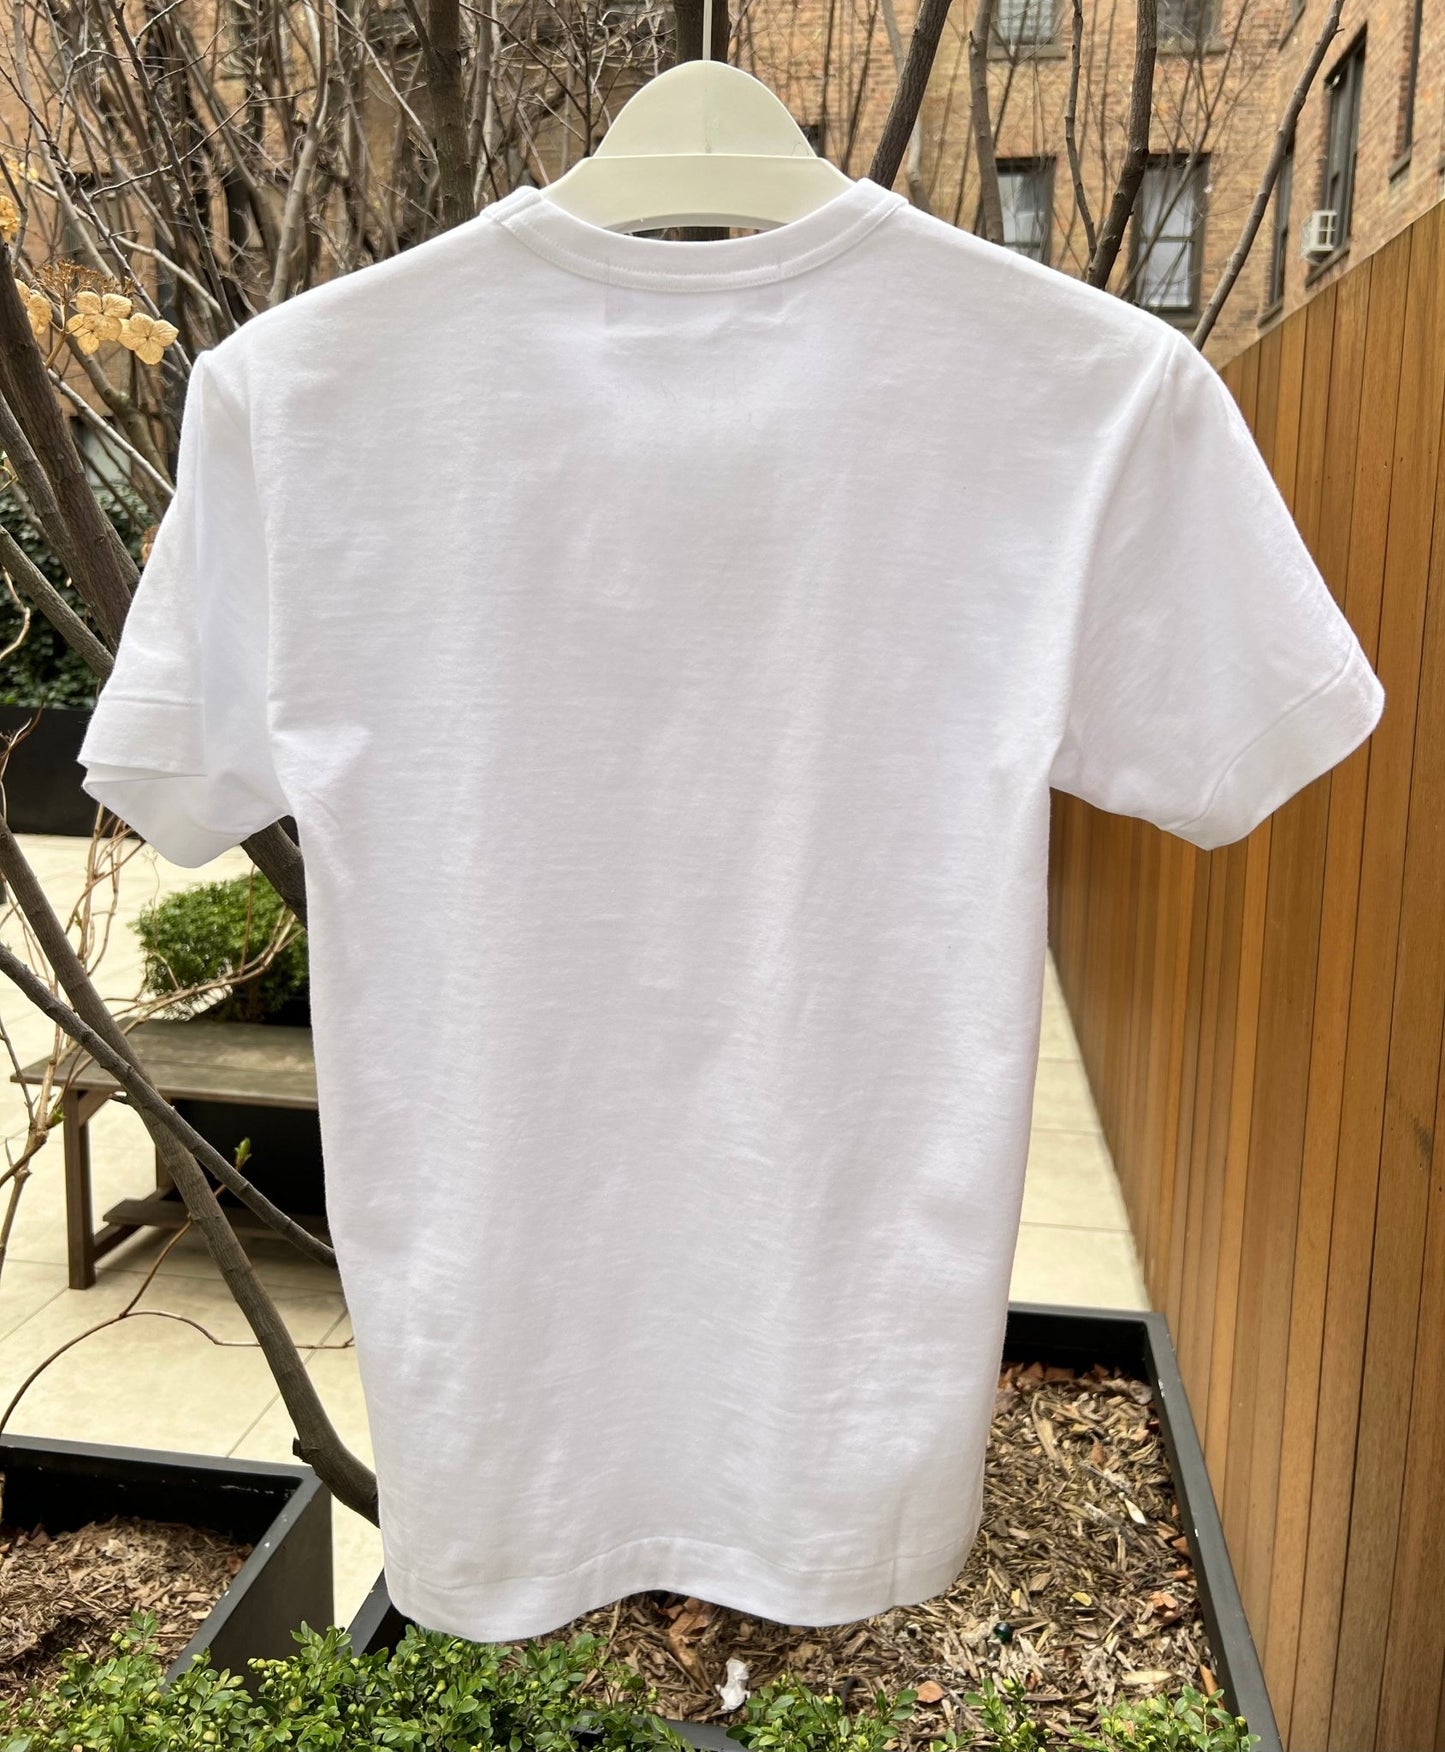 A COMME DES GARCONS COMMES DES GARCONS P1T064 PLAY T-SHIRT BLACK HEART BLACK made of 100% cotton is displayed on a hanger outdoors near potted plants and a wooden fence.